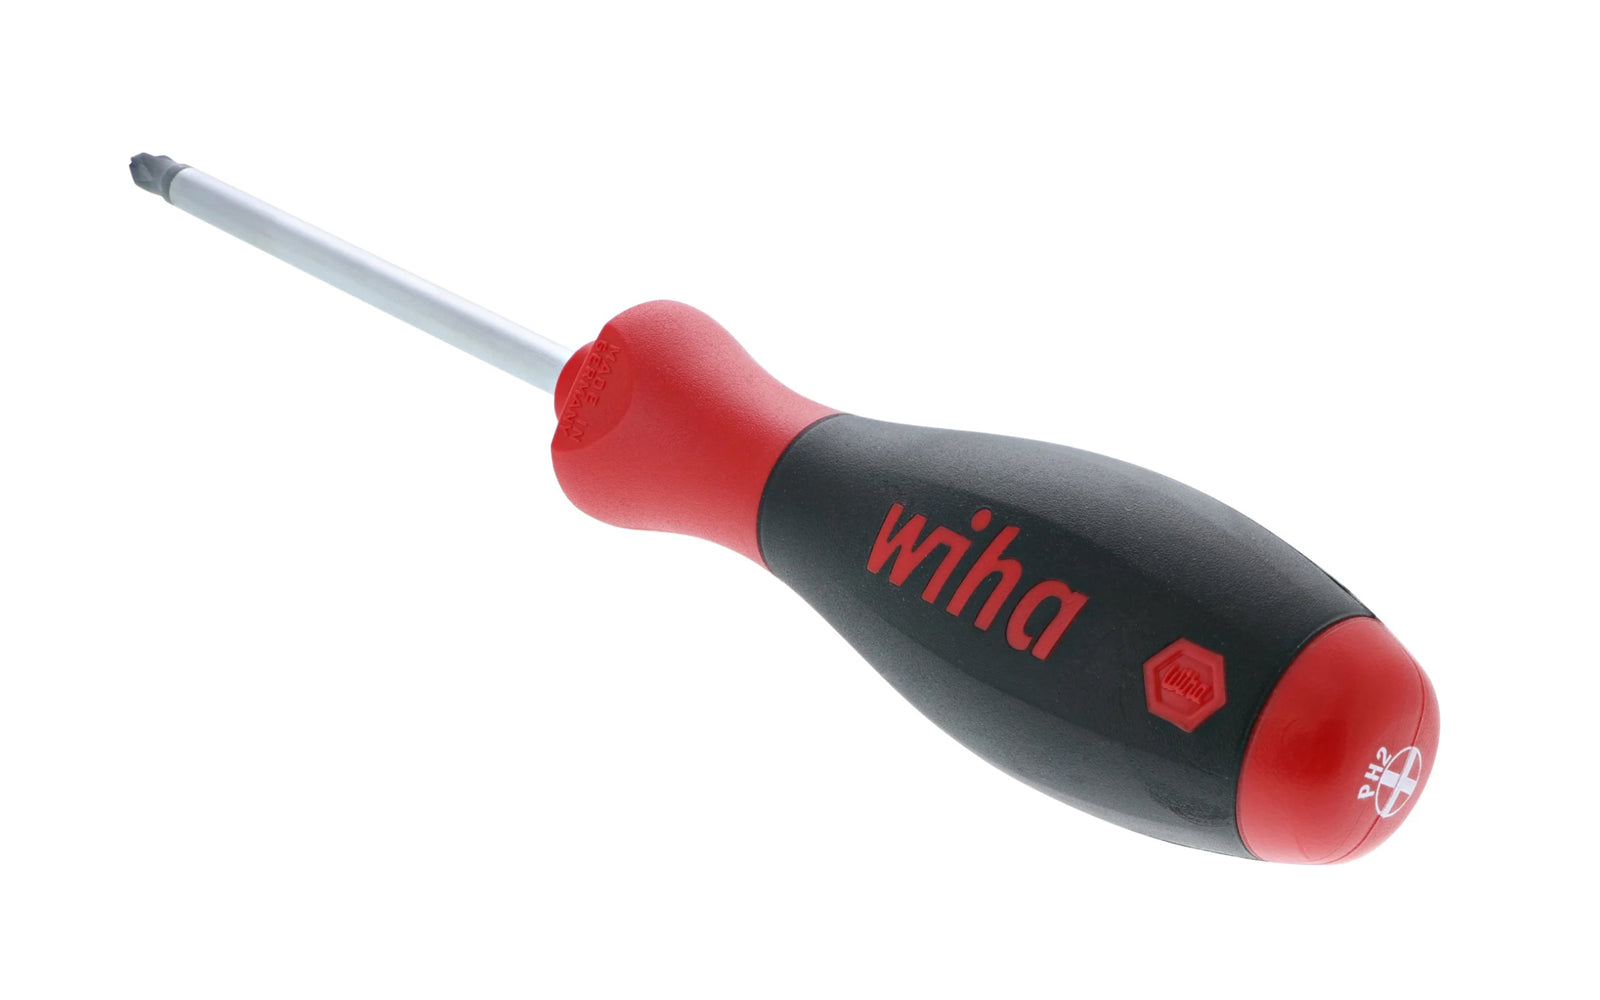 Wiha #2 Phillips Screwdriver with "SoftFinish" Grip. Premium quality tool steel for strength & durability. Wiha Model No. 31115. 8-3/4" overall length.   Made in Germany.